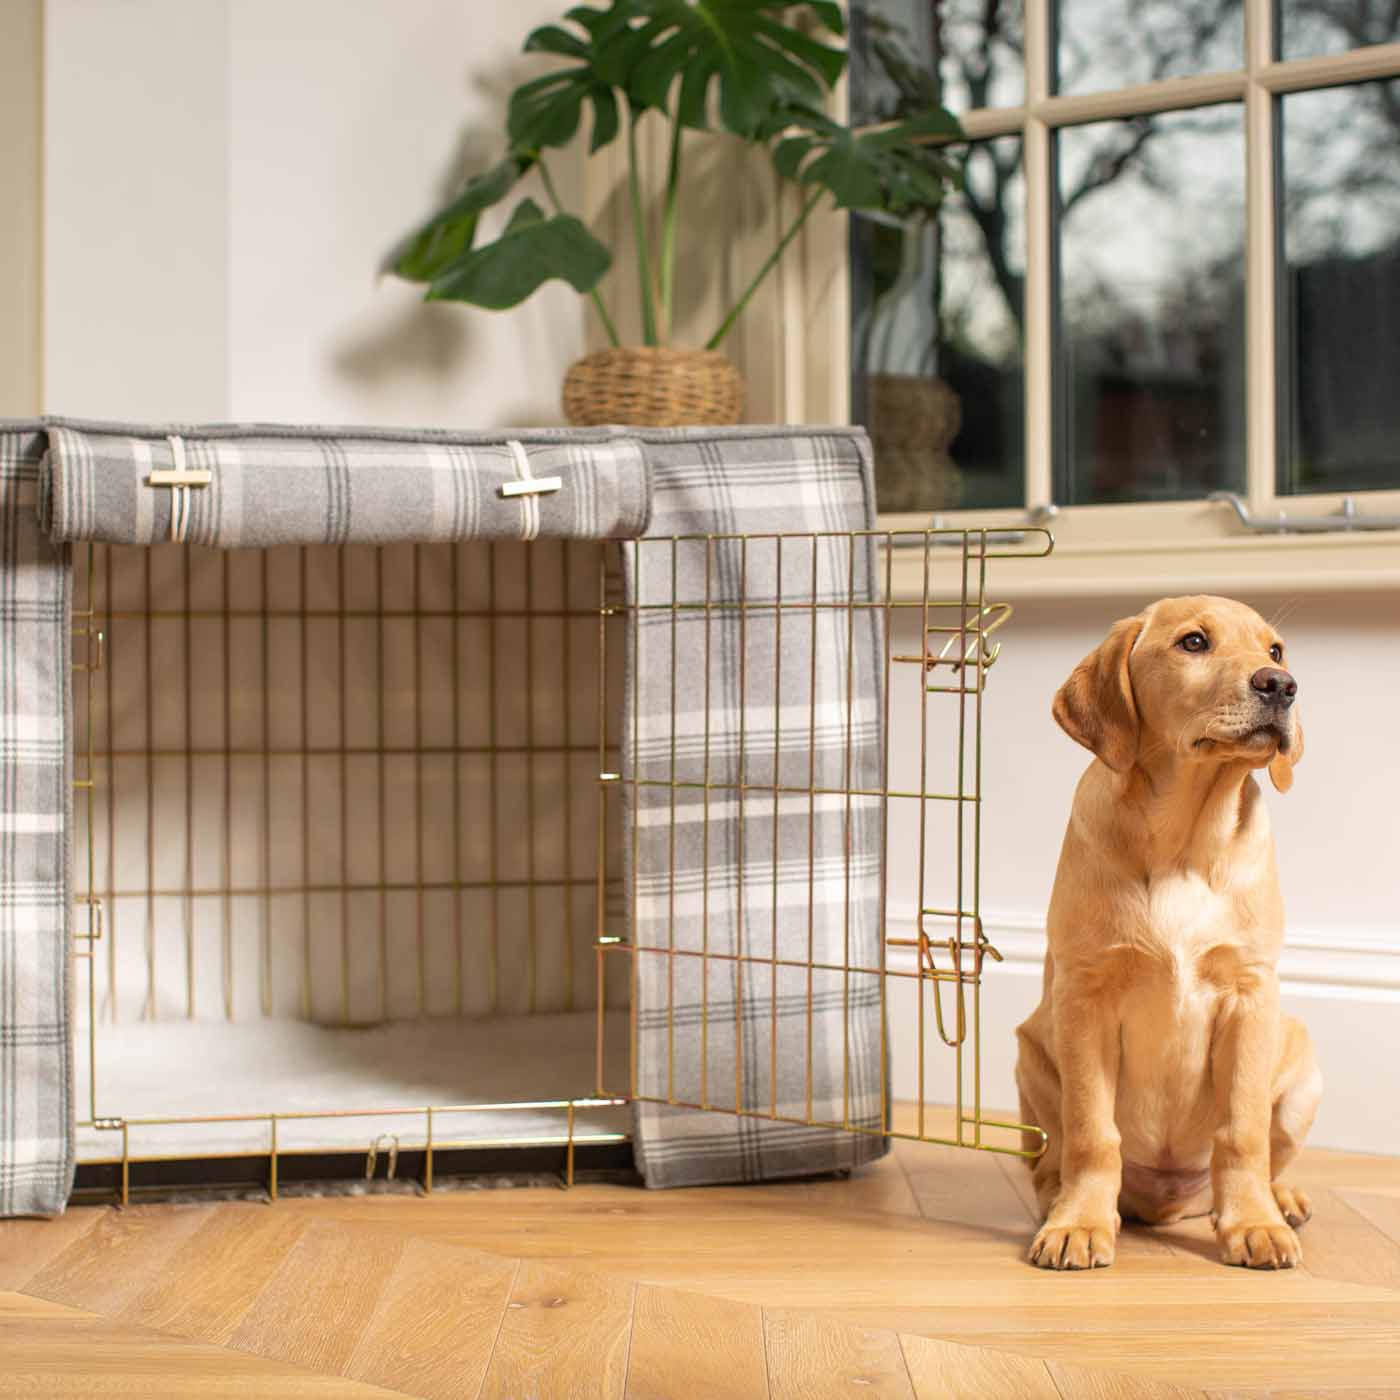 Discover Our Heavy-Duty Dog Crate With Dove Grey Tweed Crate Cover! The Perfect Crate Cover For The Perfect Crate Accessory. Available To Personalise Here at Lords & Labradors 